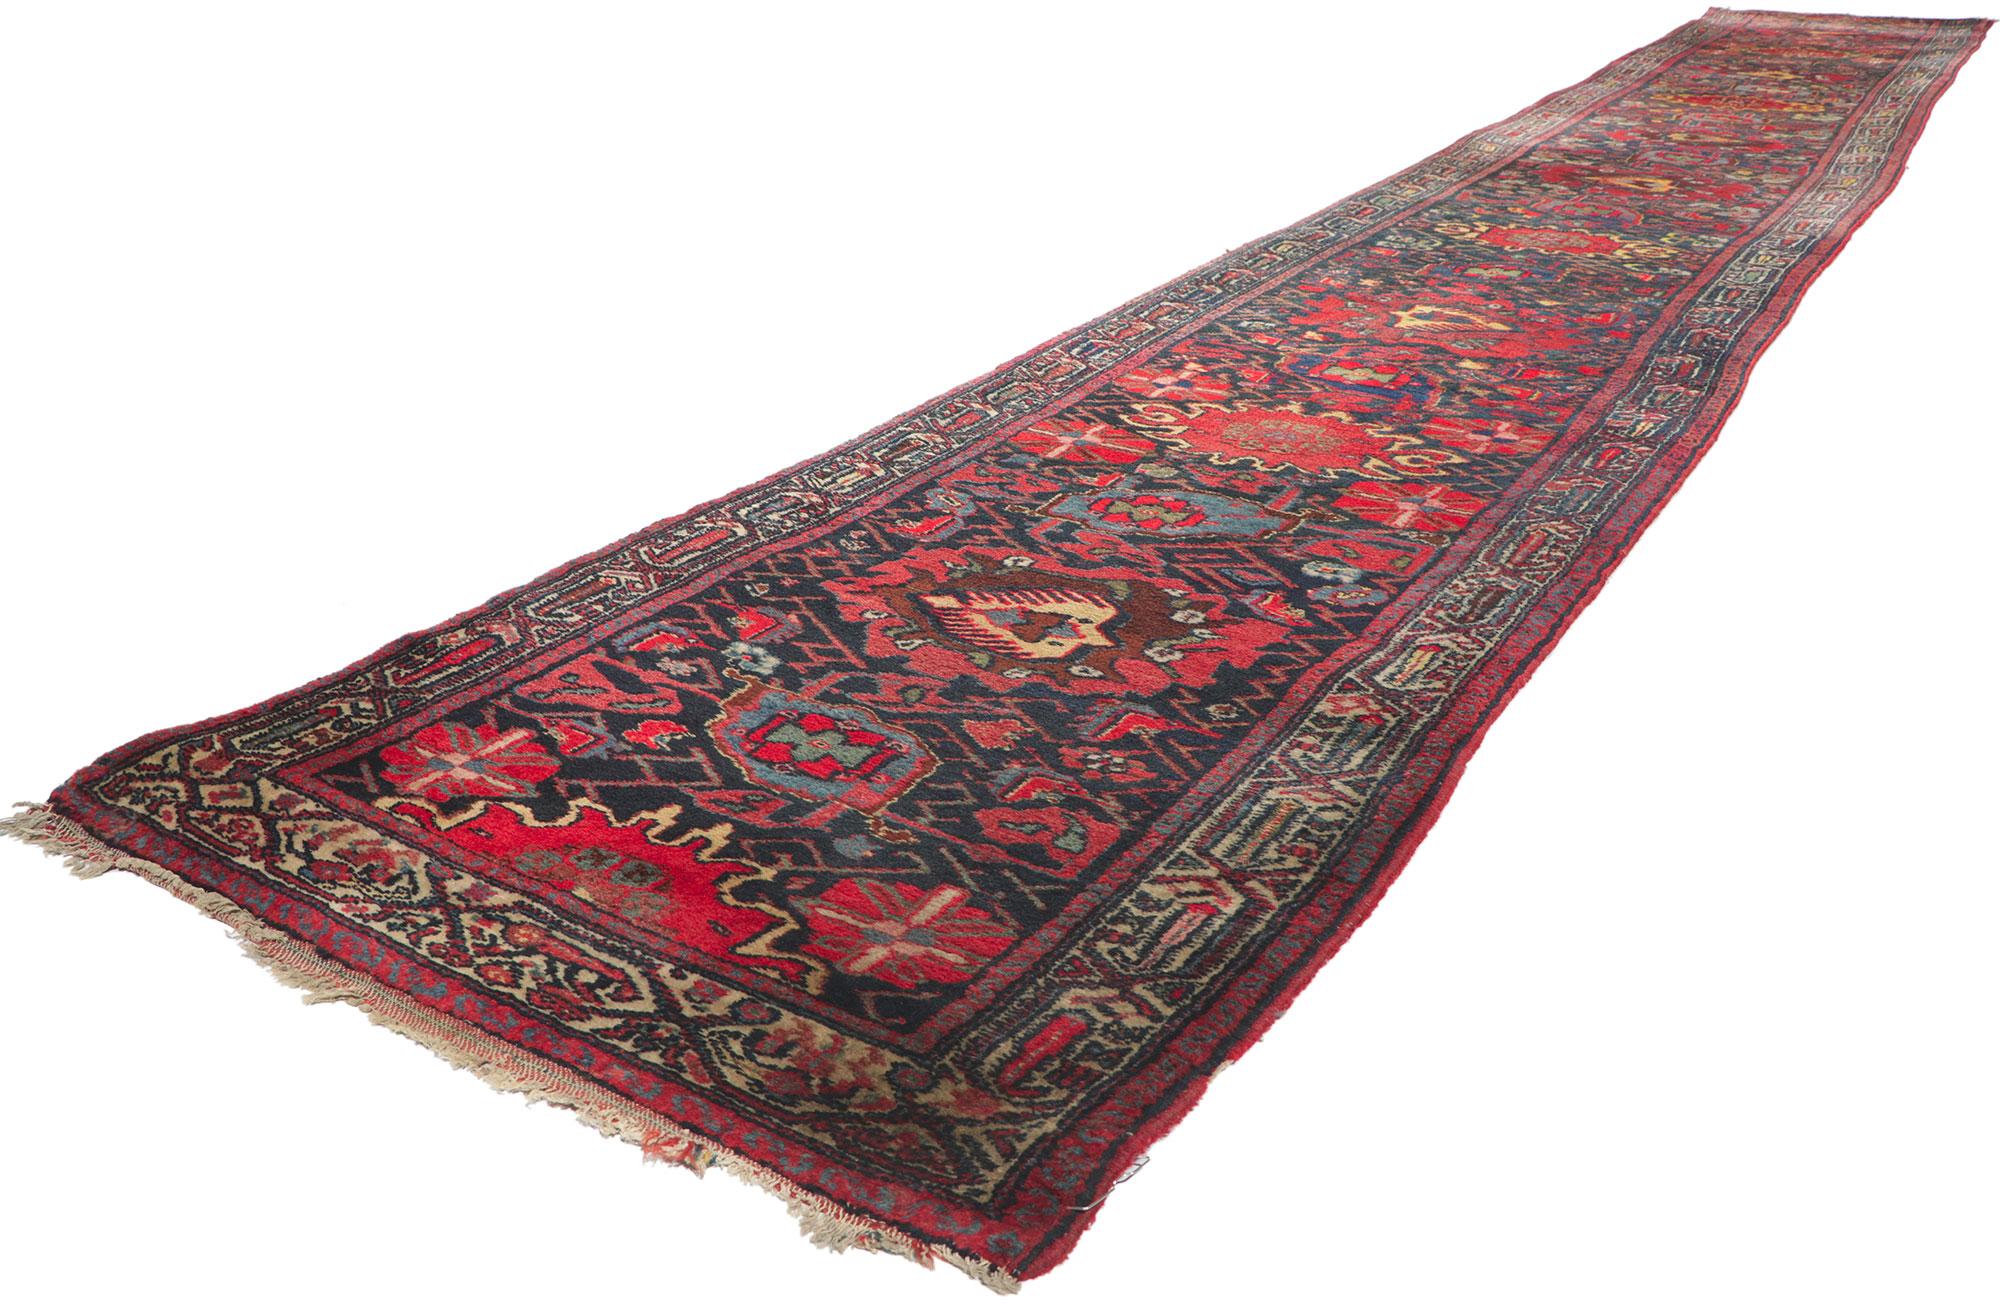 78523 Antique Persian Bibikabad Rug Runner, 02'07 x 20'02.
Full of tiny details and nomadic charm, this hand knotted wool Persian runner is a captivating vision of woven beauty. The tribal design and lively colorway woven into this piece work